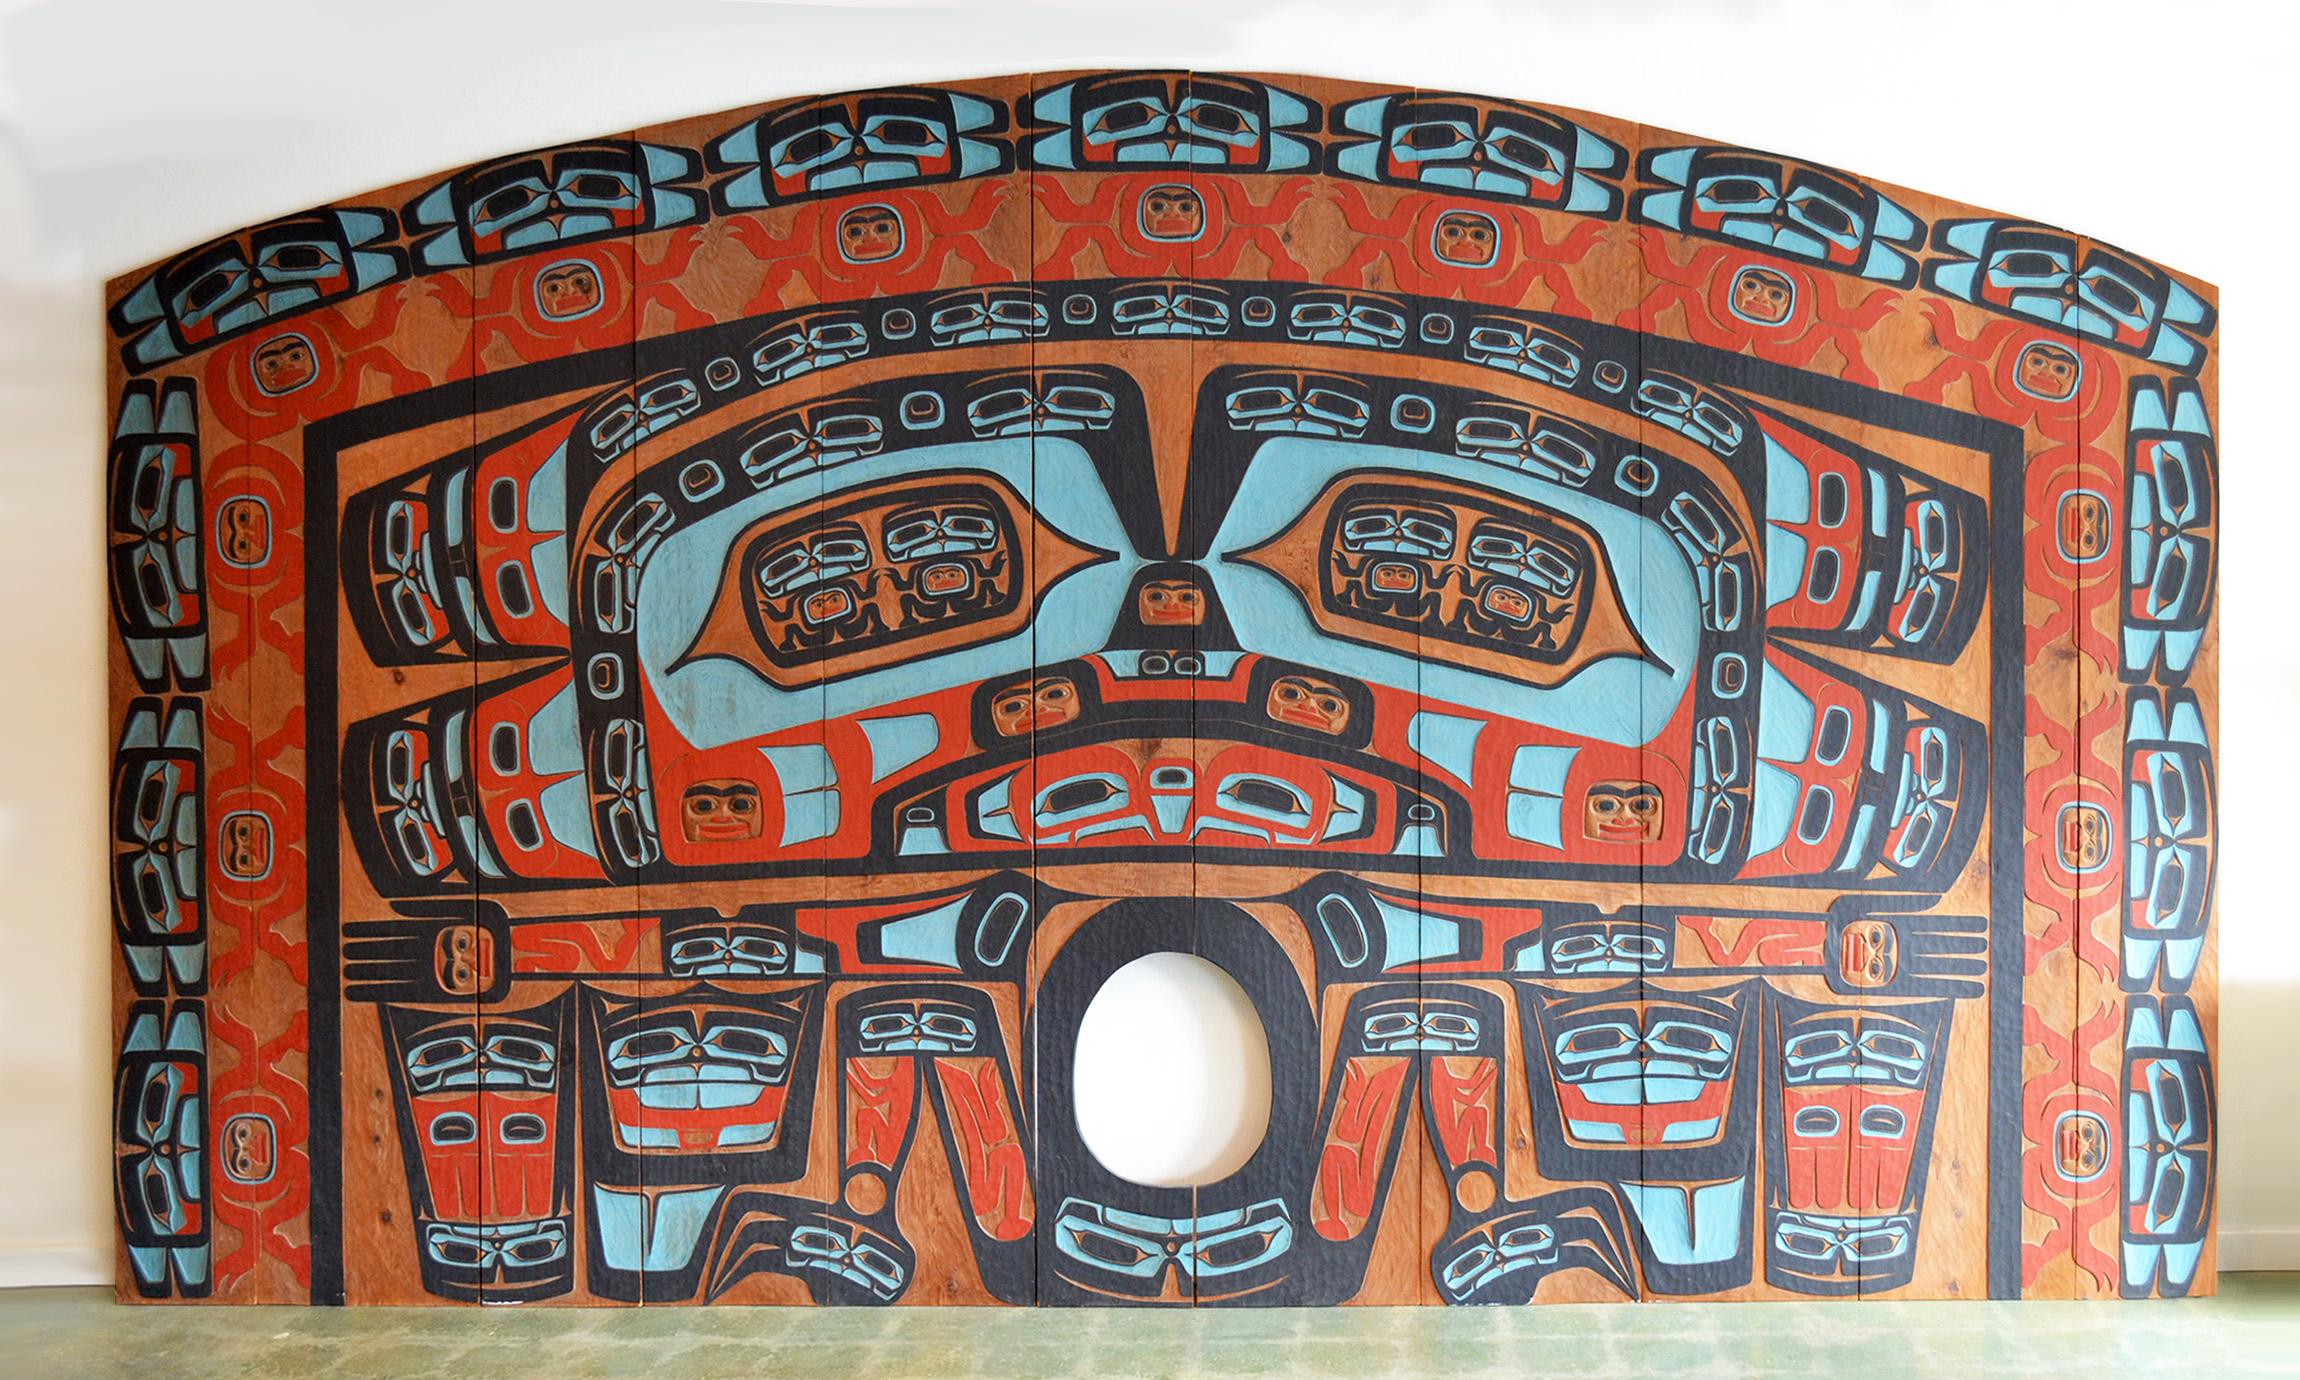 Pacific Northwest Tlingit whale house rain wall from Donald Judd Estate c. 1968

A monumental polychrome and carved cedar eleven panel Tlingit Whale House Rain Wall (Raven clan, Chilkat tribe) produced by Northwest Coast Tlingit artist Chief Don